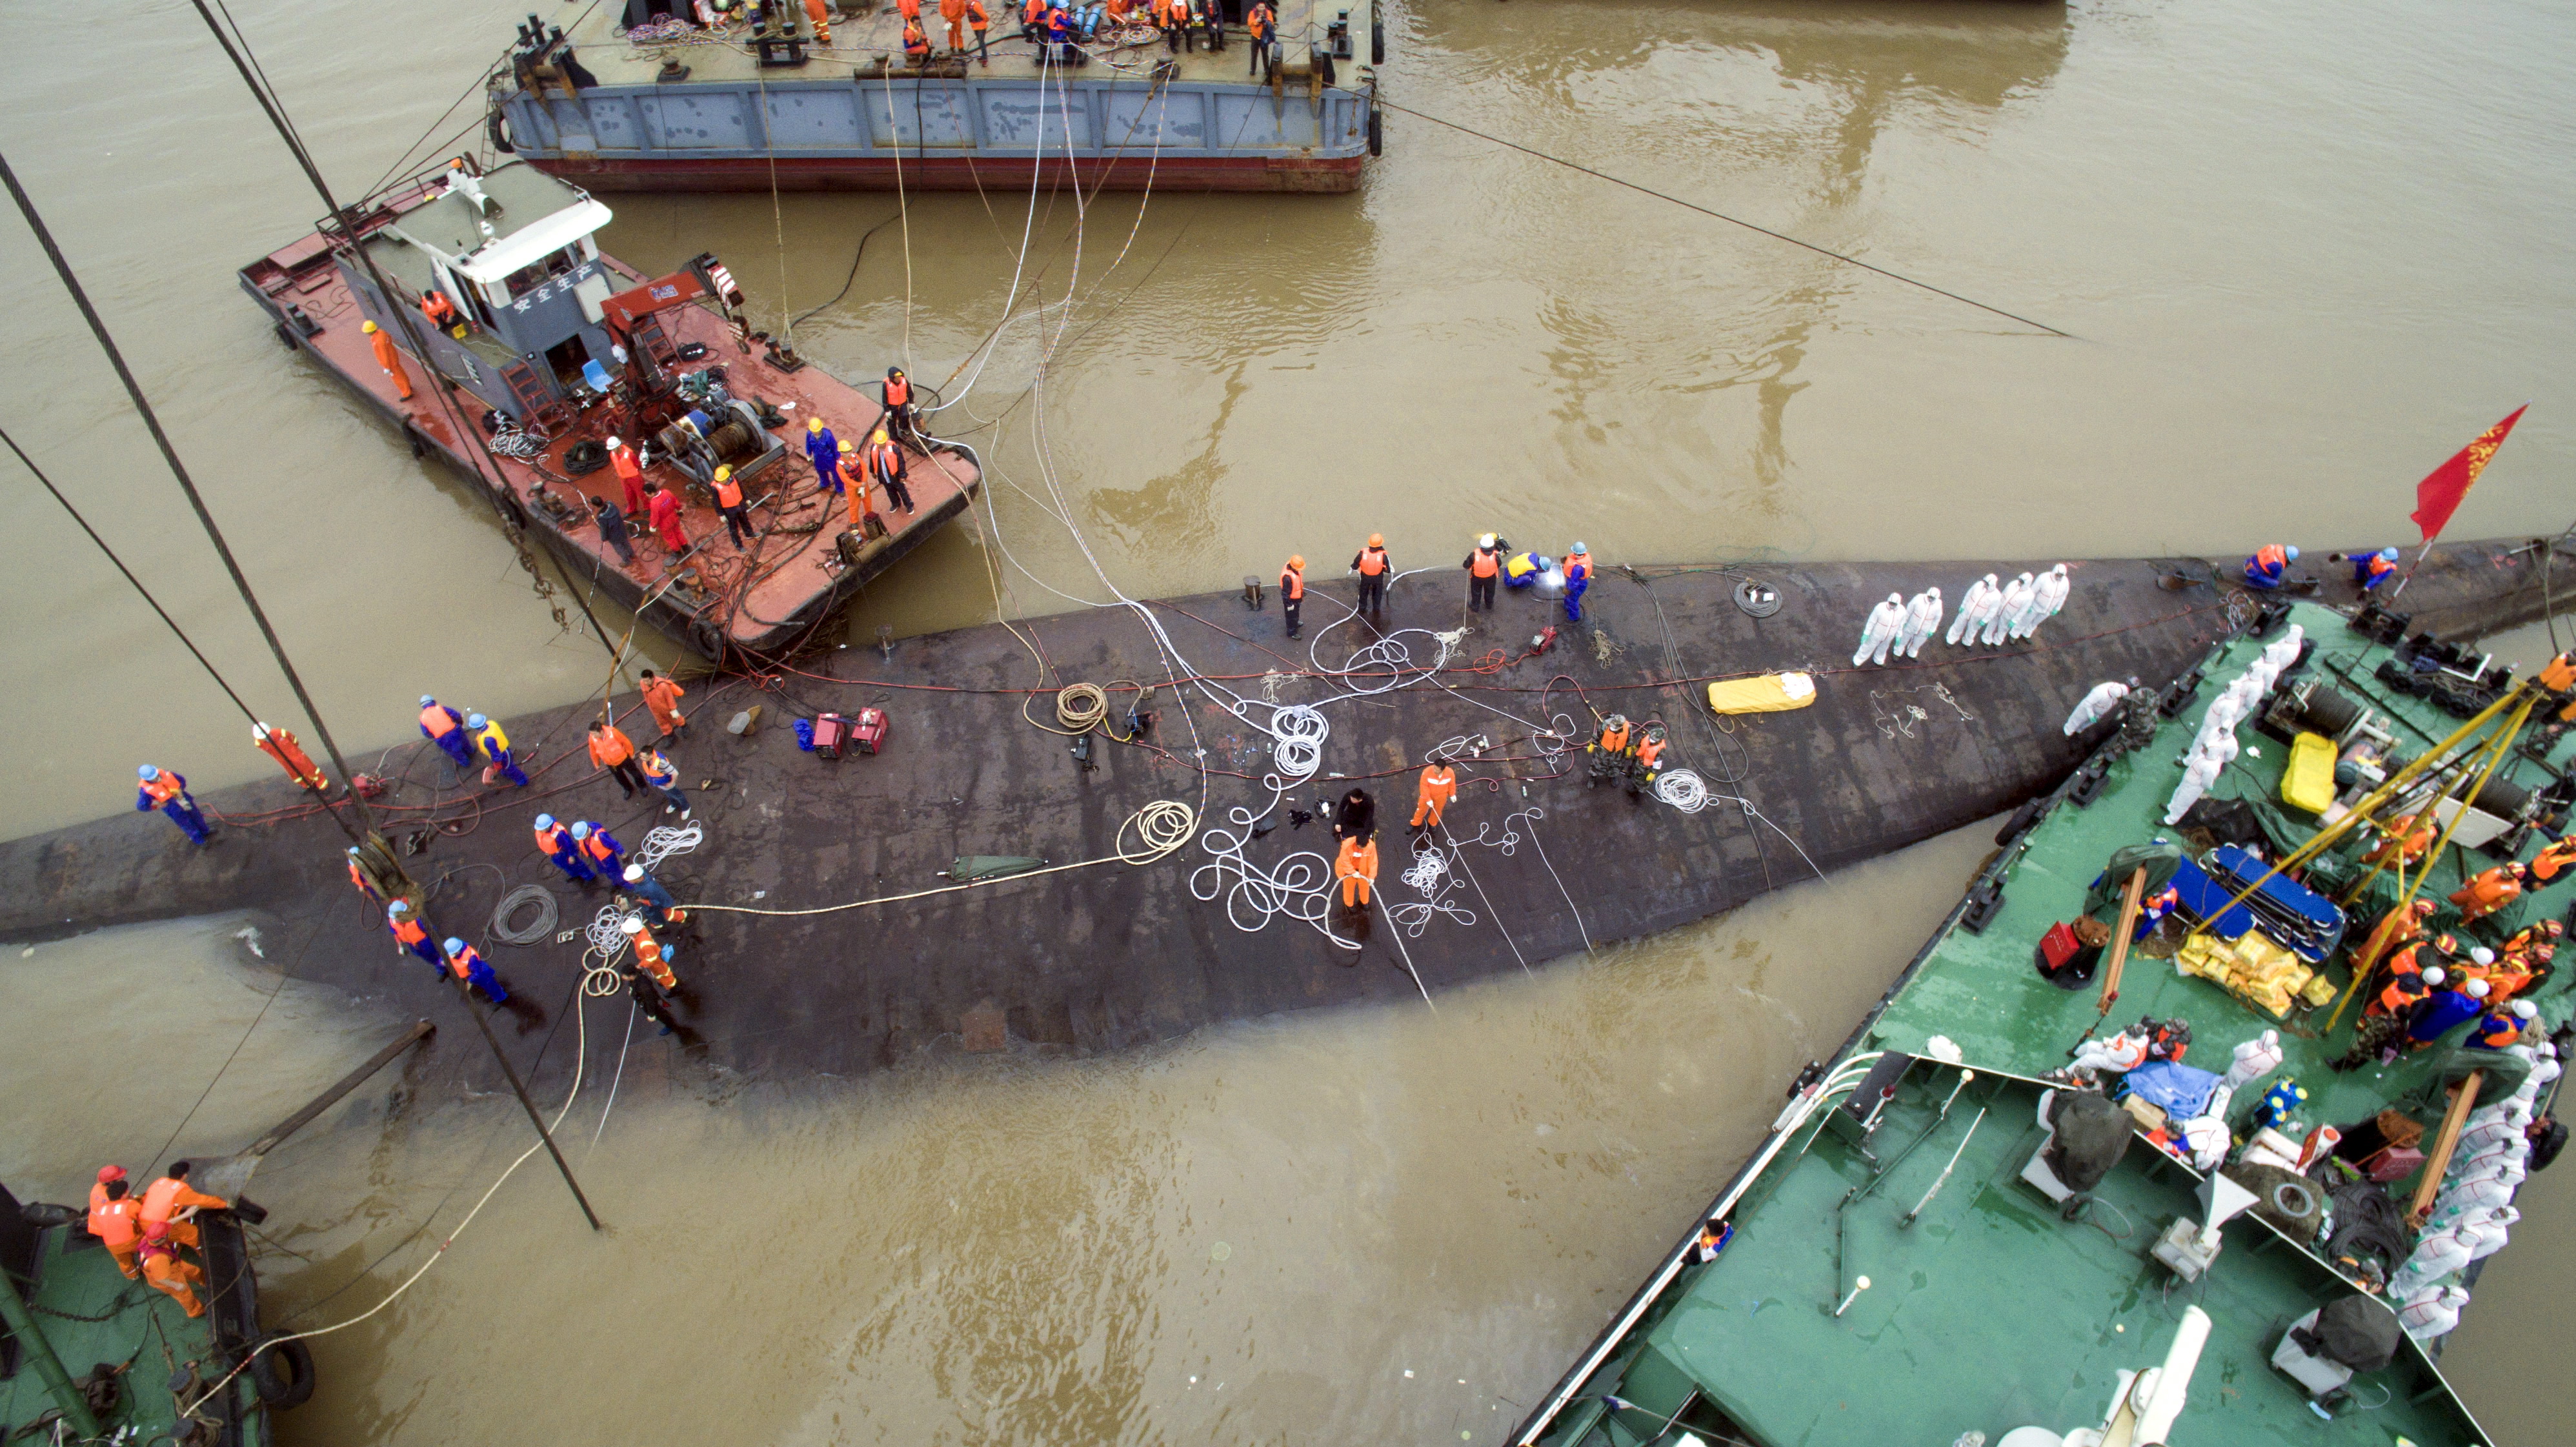 An aerial view shows rescue workers standing on the sunken cruise ship Eastern Star in Jianli